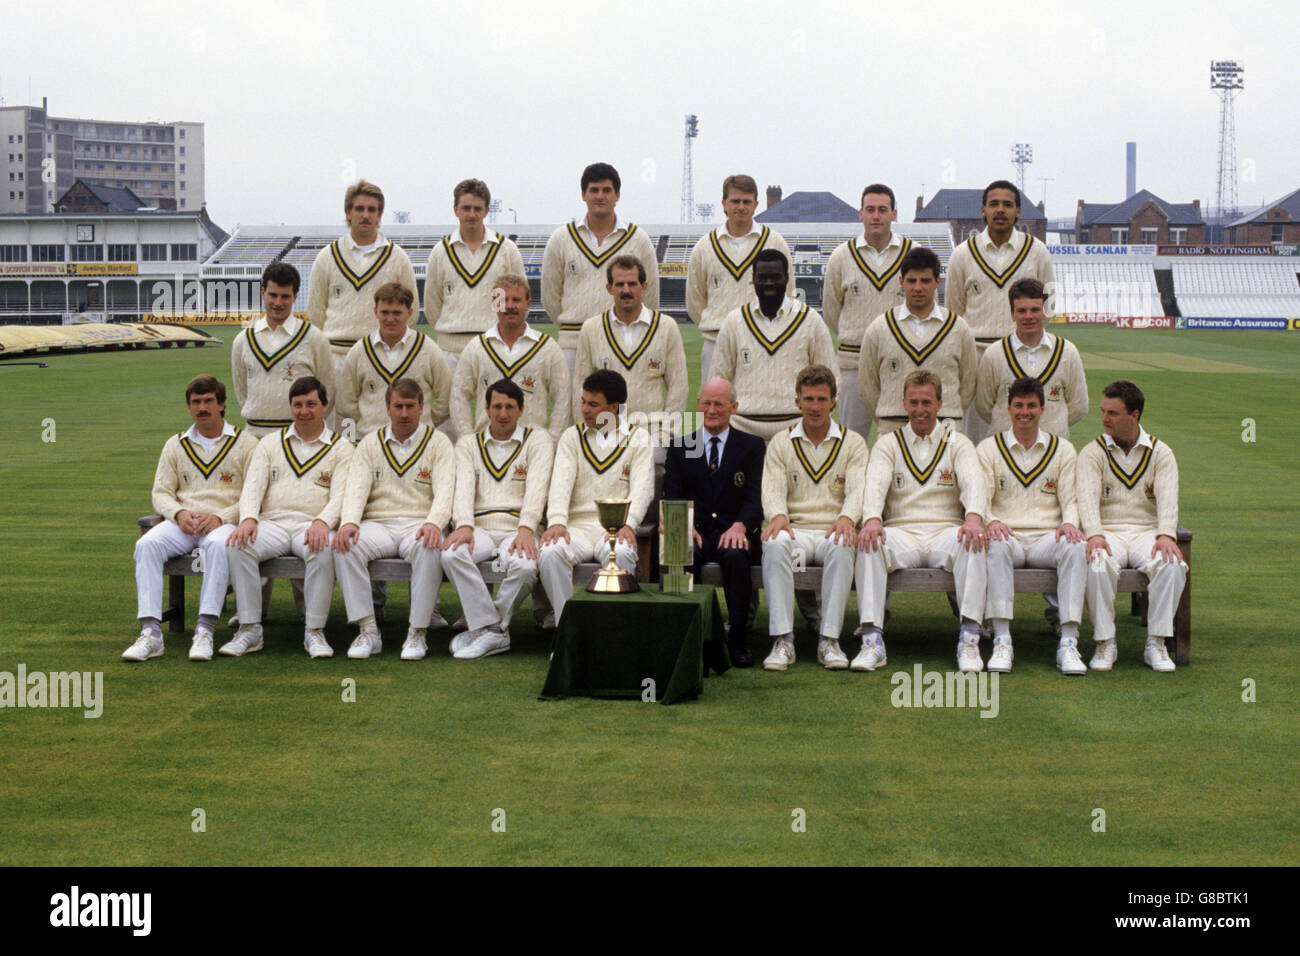 Members of Nottinghamshire County Cricket Club for the 1988 season at Trent Bridge. Back Row: (from left) Paul Pollard, Russell Evans, David Fraser Darling, Kevin Evans, Andrew Afford and G Mike. Middle Row: Duncan Martindale, Christopher Scott, Andrew Pick, Kevin Saxelby, Franklyn Stephenson, David Millns and Michael Newell. Front Row: Bruce French, Michael Bore, Edward Hemmings, Derek Randall, Tim Robinson (captain), KA Taylor, Chris Broad, John Birch, Kevin Cooper and Paul Johnson. Stock Photo